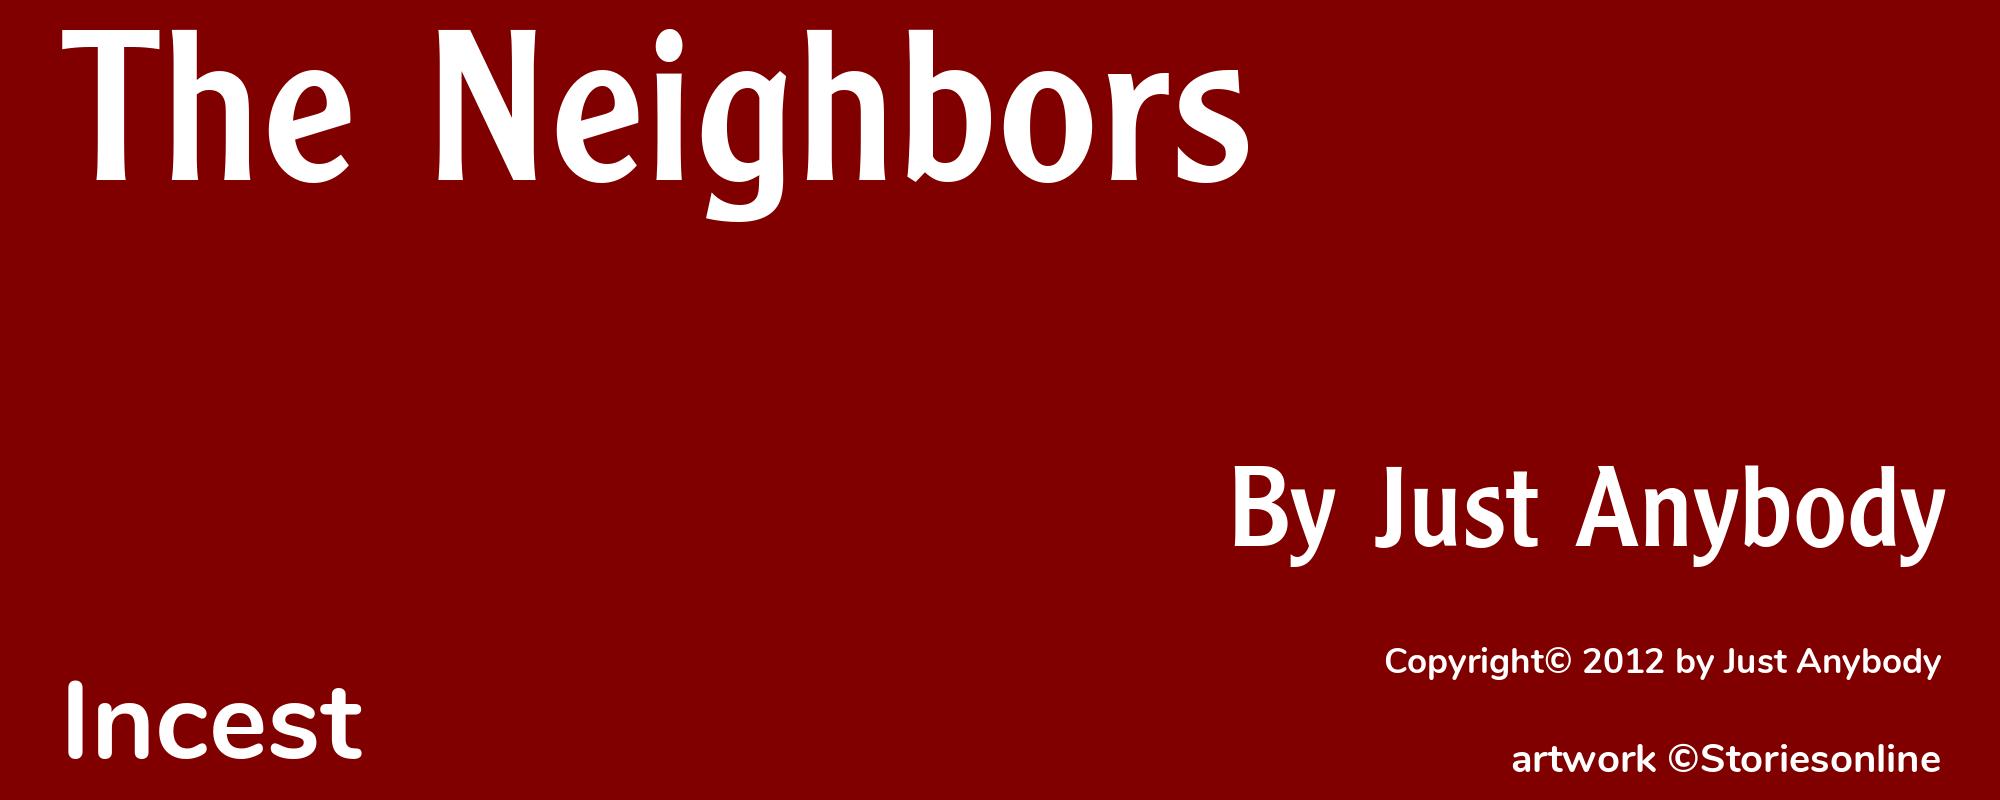 The Neighbors - Cover